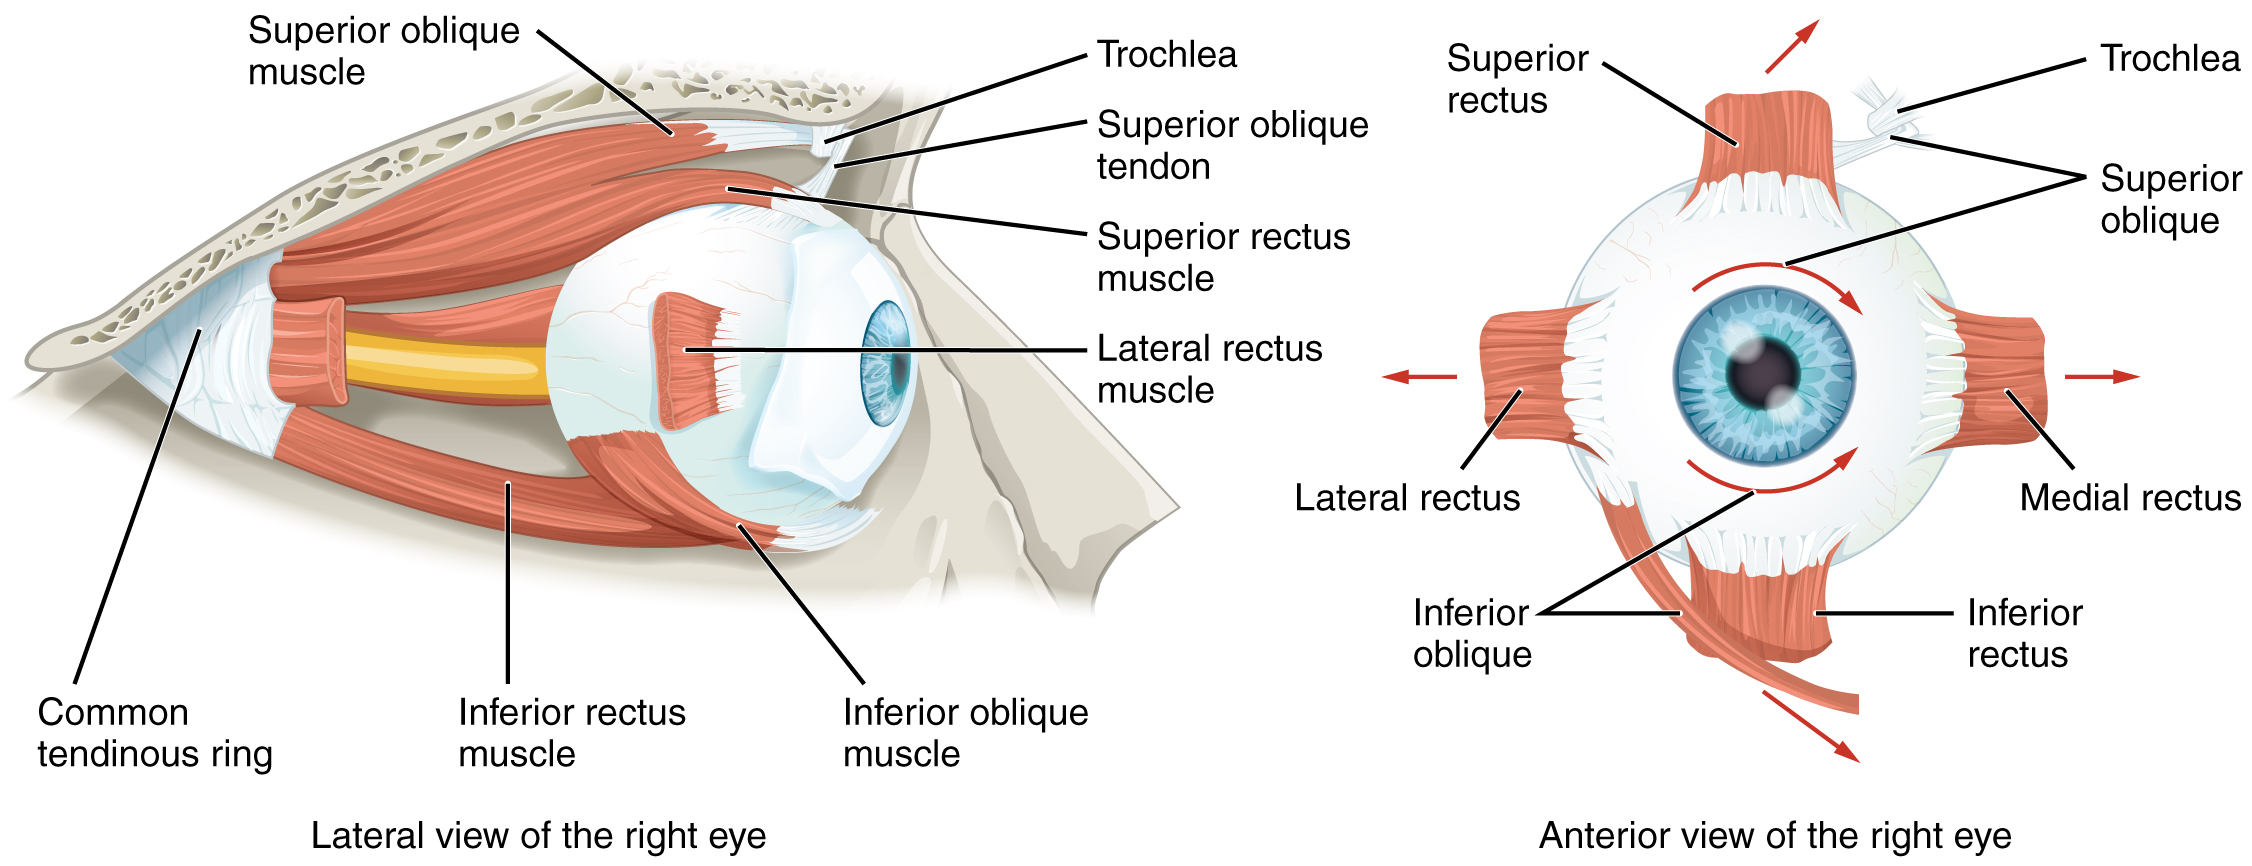 Extraocular muscles